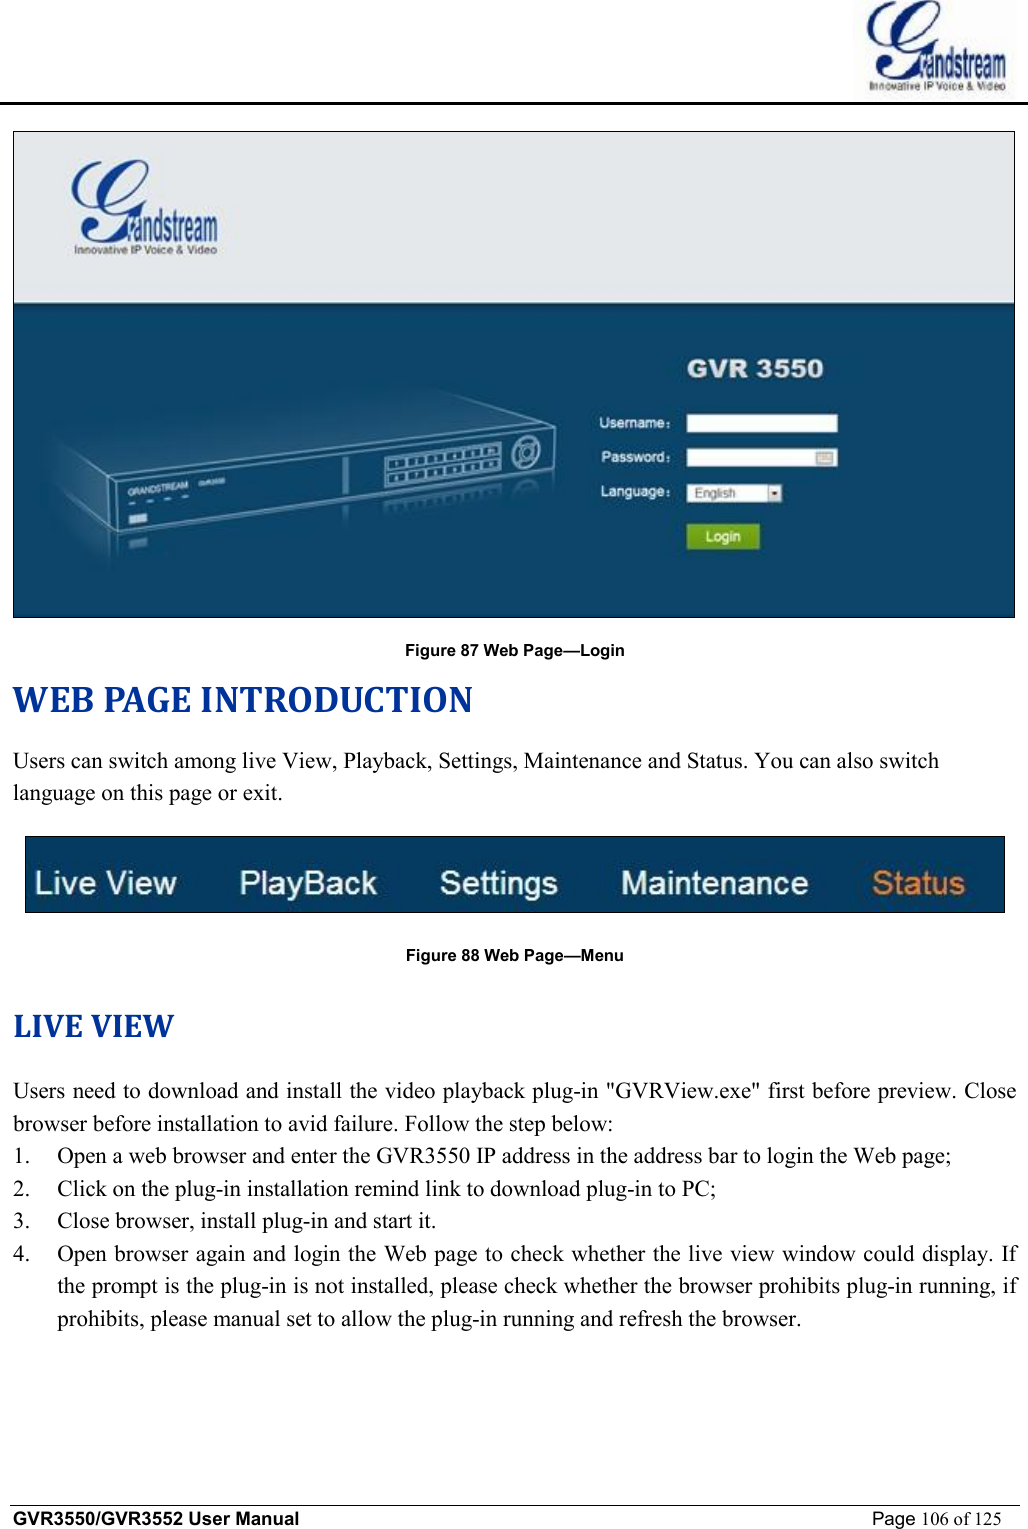    GVR3550/GVR3552 User Manual                                                             Page 106 of 125         Figure 87 Web Page—Login WEB PAGE INTRODUCTION Users can switch among live View, Playback, Settings, Maintenance and Status. You can also switch language on this page or exit.  Figure 88 Web Page—Menu LIVE VIEW Users need to download and install the video playback plug-in &quot;GVRView.exe&quot; first before preview. Close browser before installation to avid failure. Follow the step below: 1. Open a web browser and enter the GVR3550 IP address in the address bar to login the Web page; 2. Click on the plug-in installation remind link to download plug-in to PC; 3. Close browser, install plug-in and start it. 4. Open browser again and login the Web page to check whether the live view window could display. If the prompt is the plug-in is not installed, please check whether the browser prohibits plug-in running, if prohibits, please manual set to allow the plug-in running and refresh the browser.  